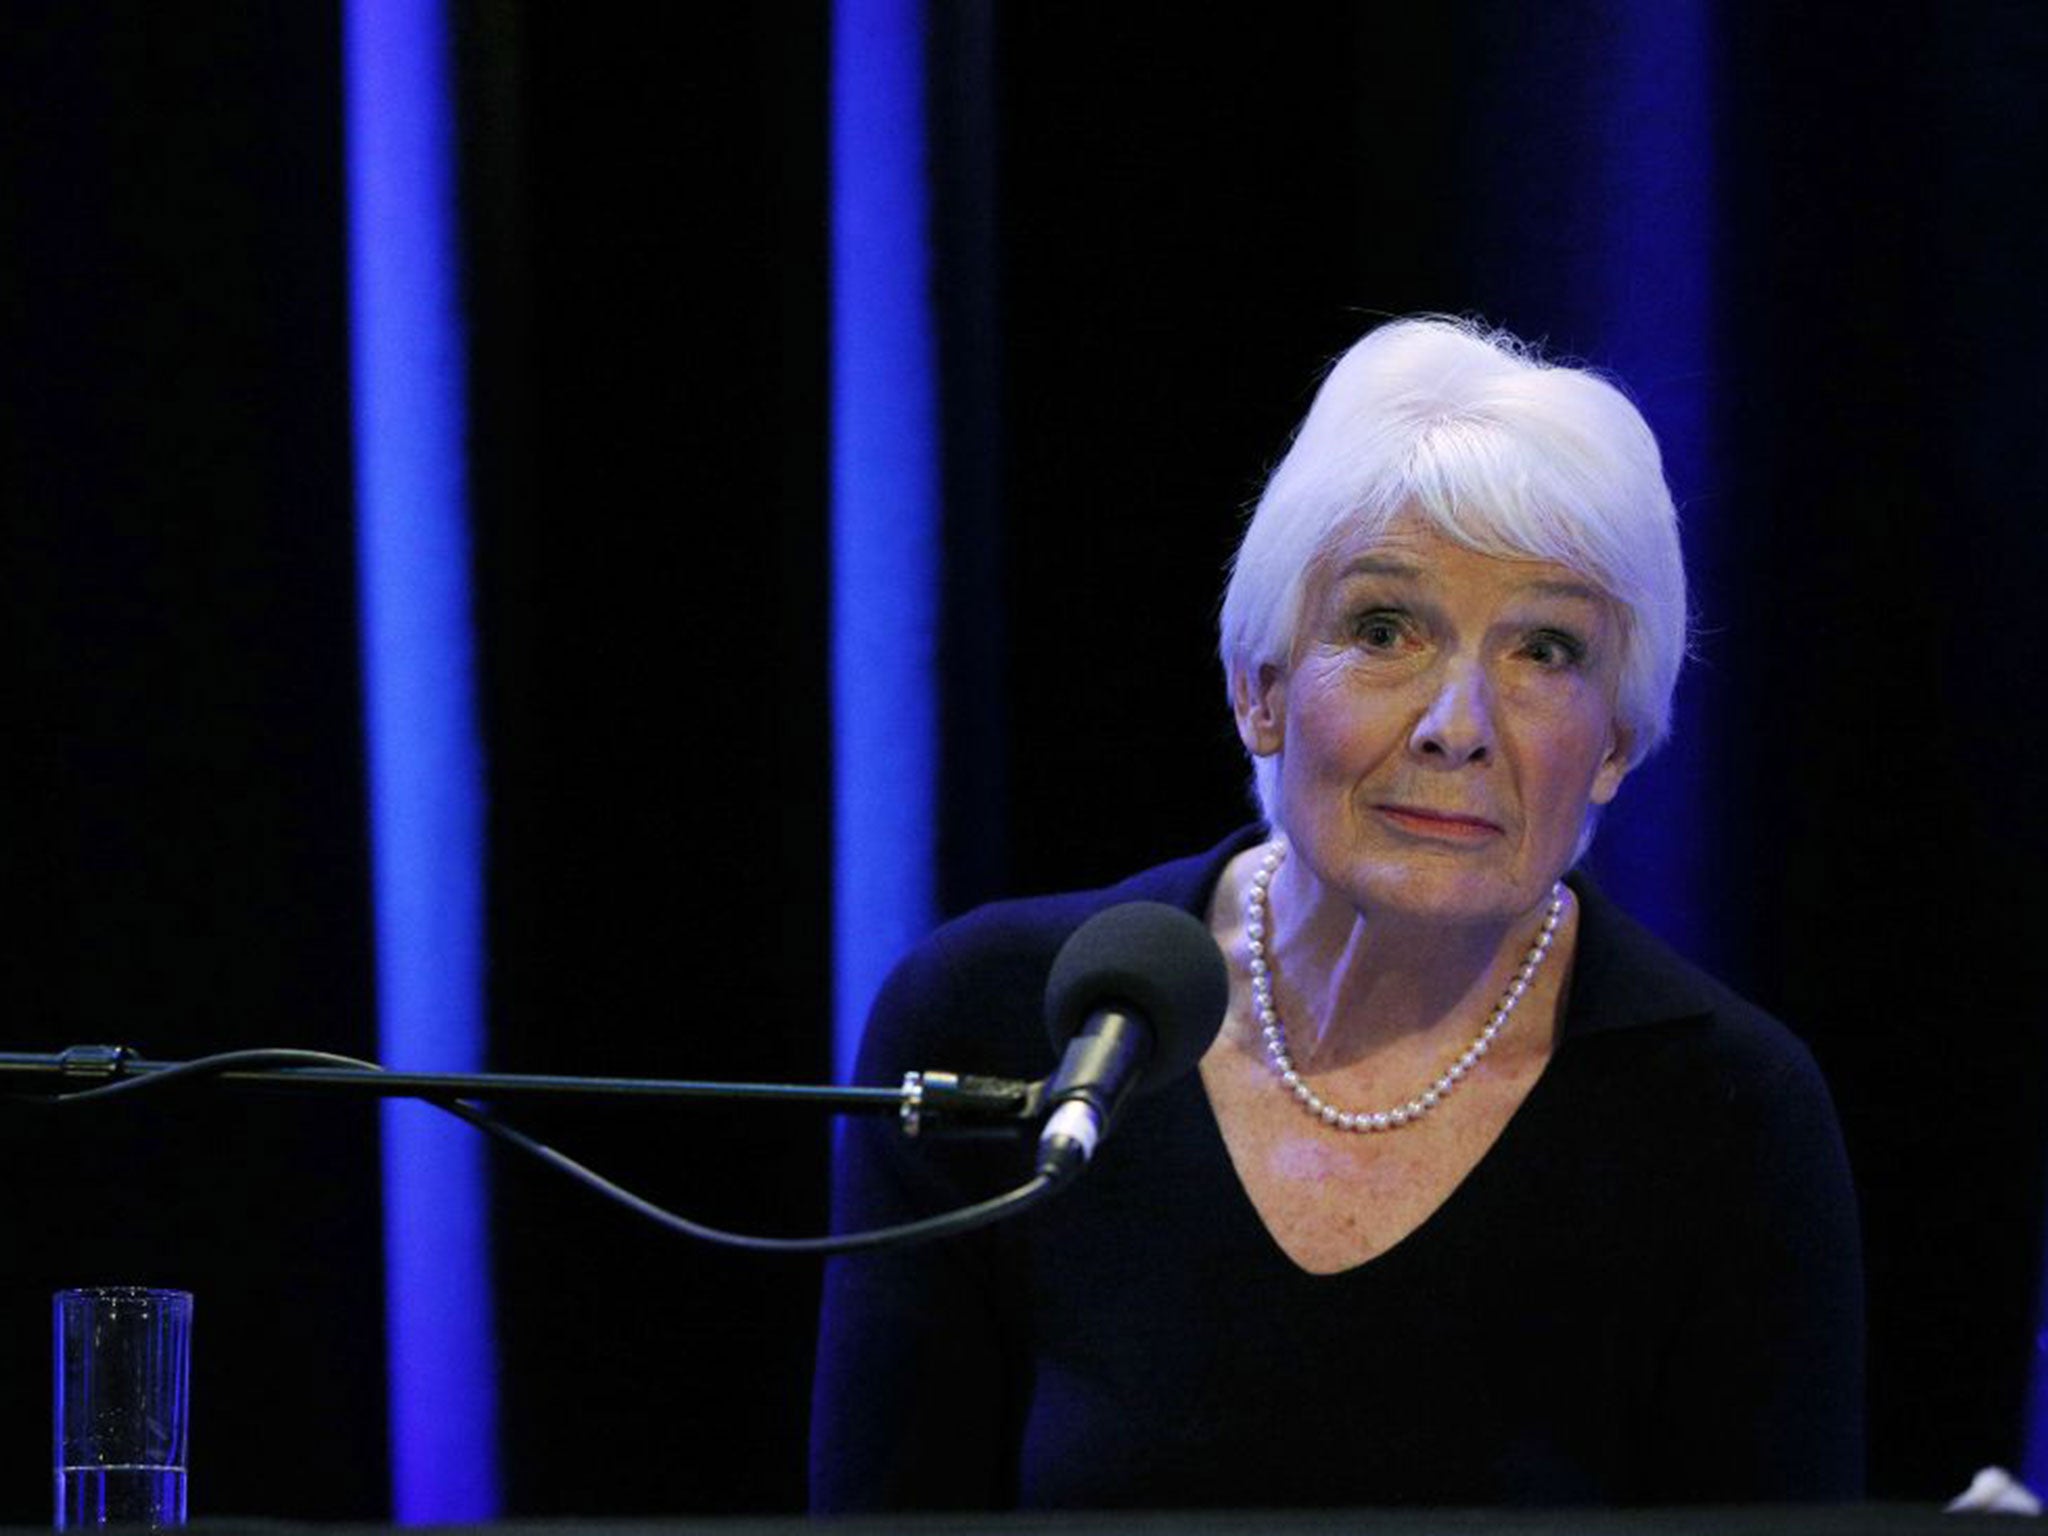 &#13;
Dame Janet Smith was scathing of the decisions of BBC managers to repeatedly give Savile “a platform” &#13;